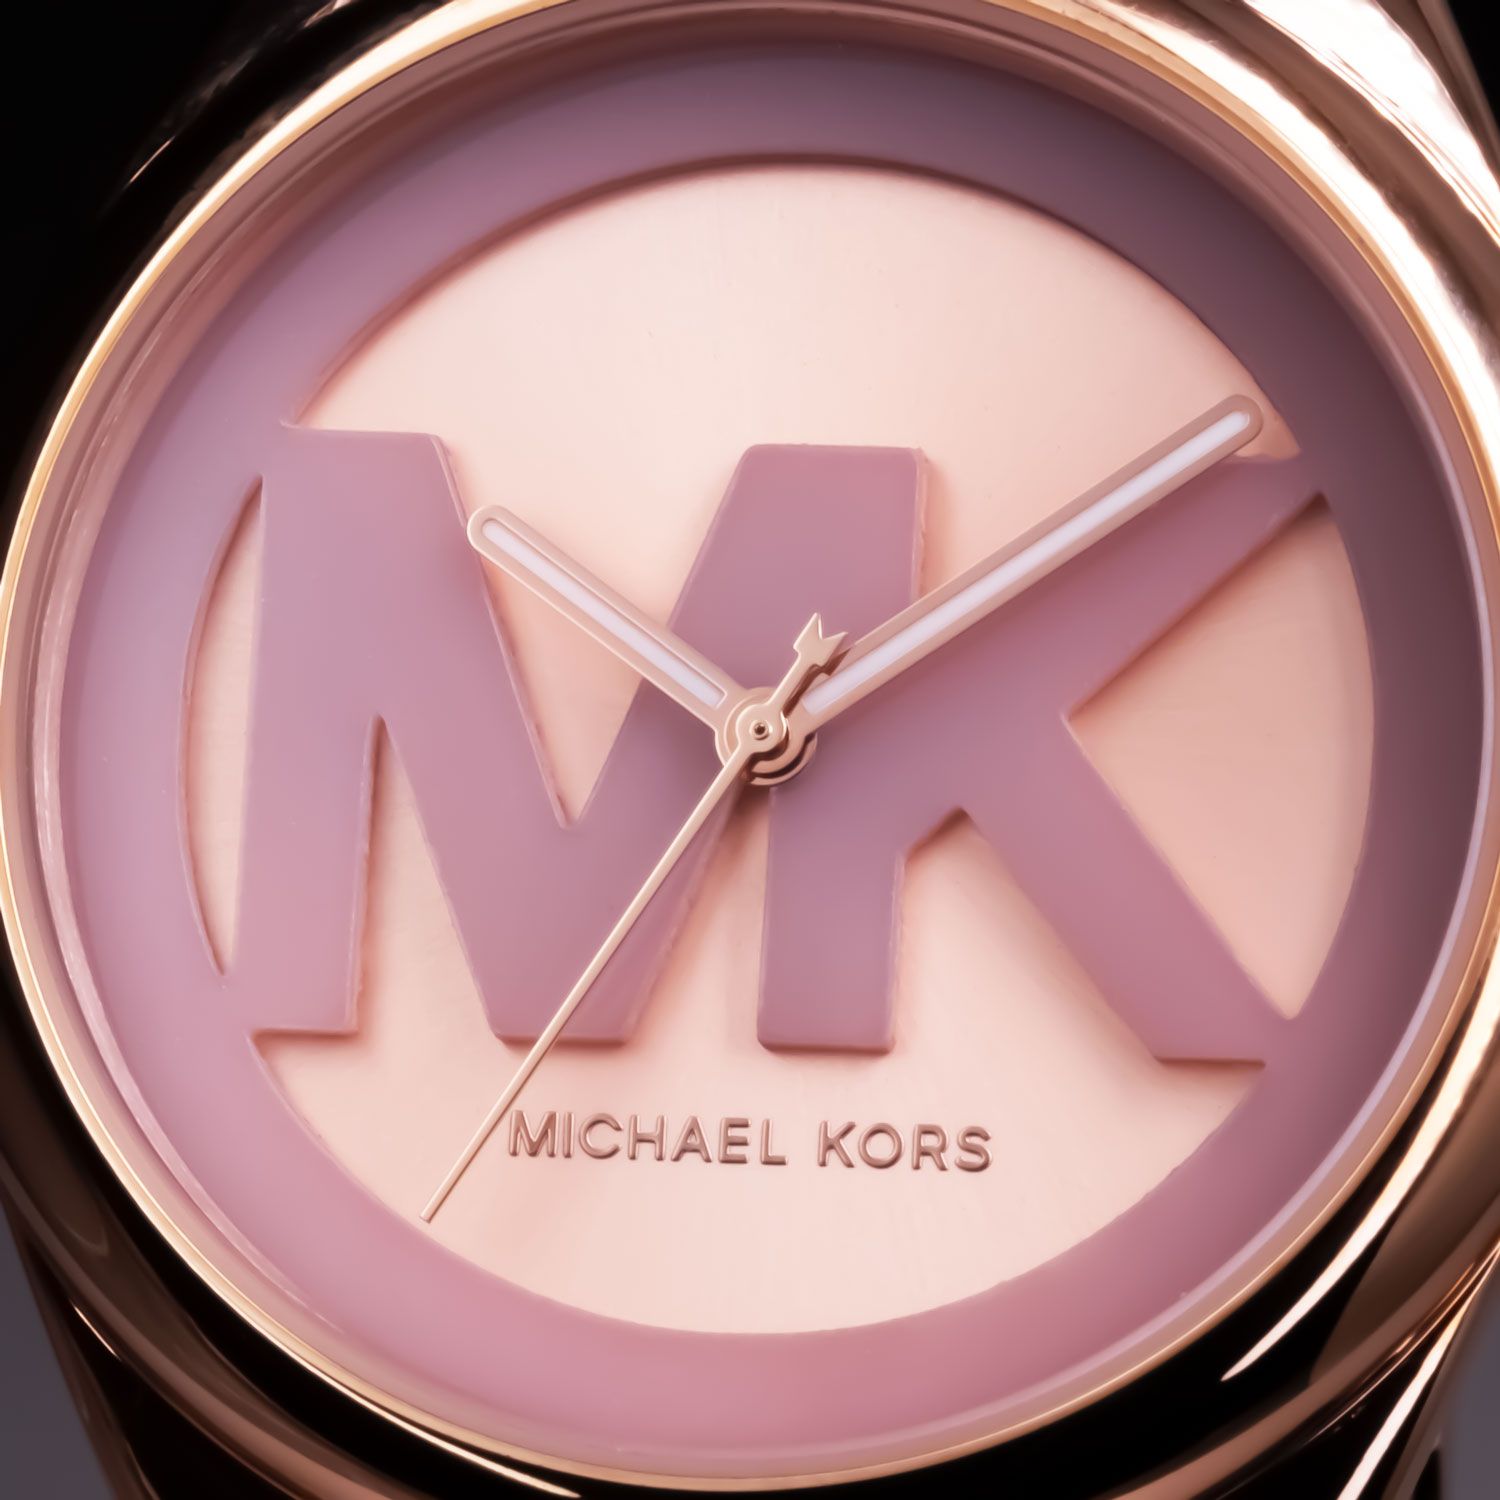 ĐỒNG HỒ NỮ MICHAEL KORS RUNWAY JANELLE ROSE GOLD PINK SILICONE WATCH MK7139 2